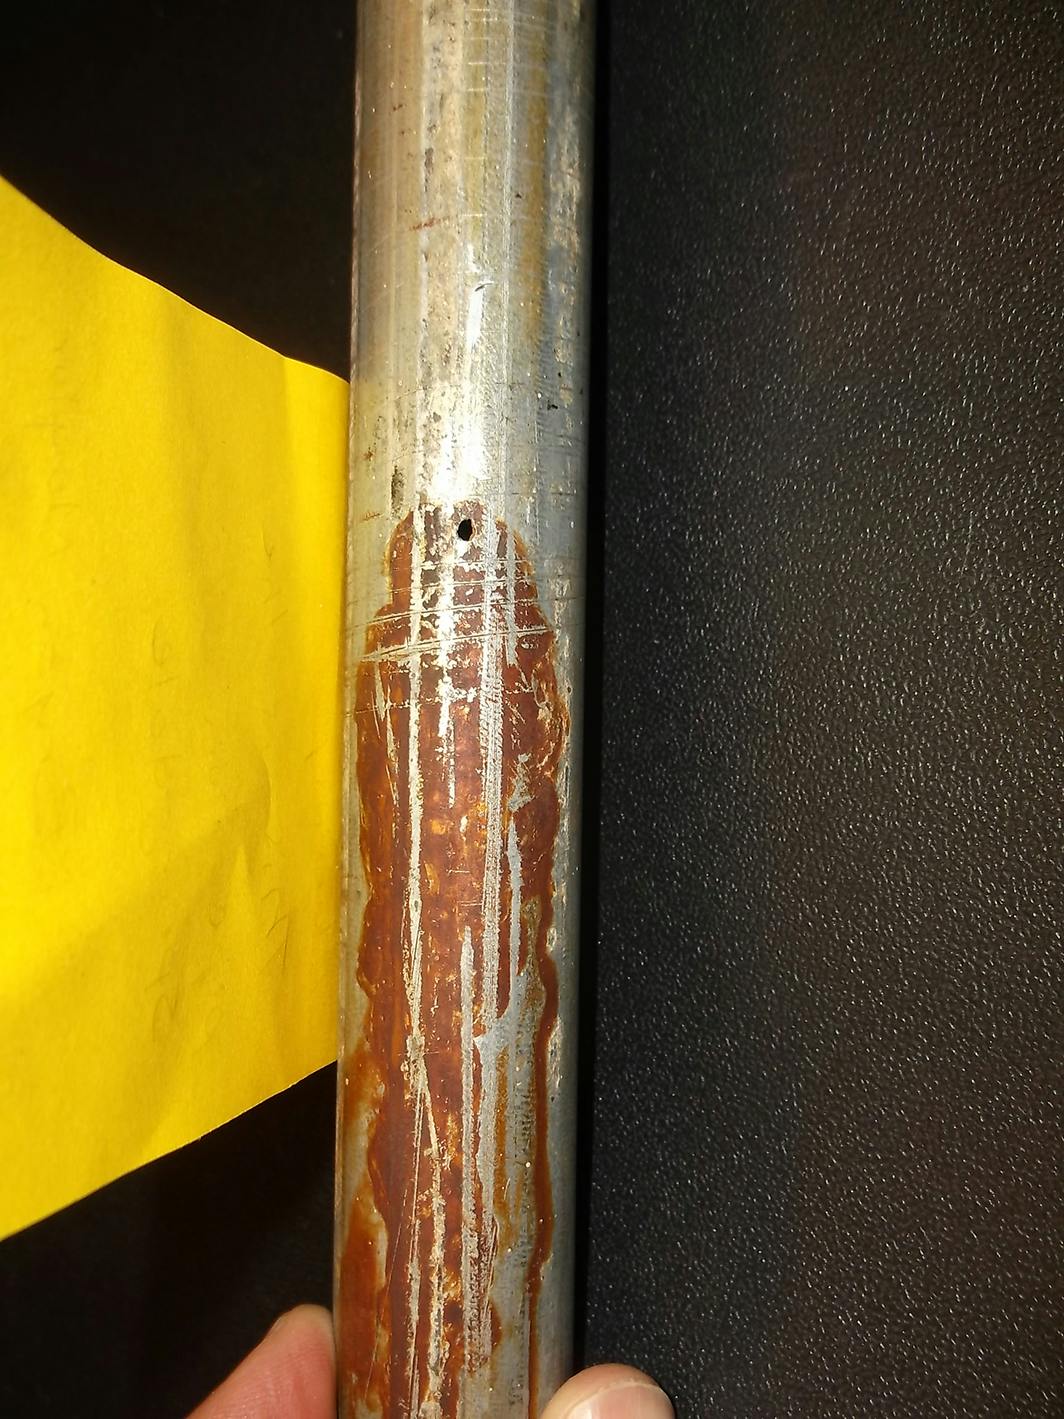 Figure (4): A view of failed Schedule 5 galvanized steel HVAC piping. The rust stain is from leaked water. This piping was part of a school HVAC water source heat pump system.